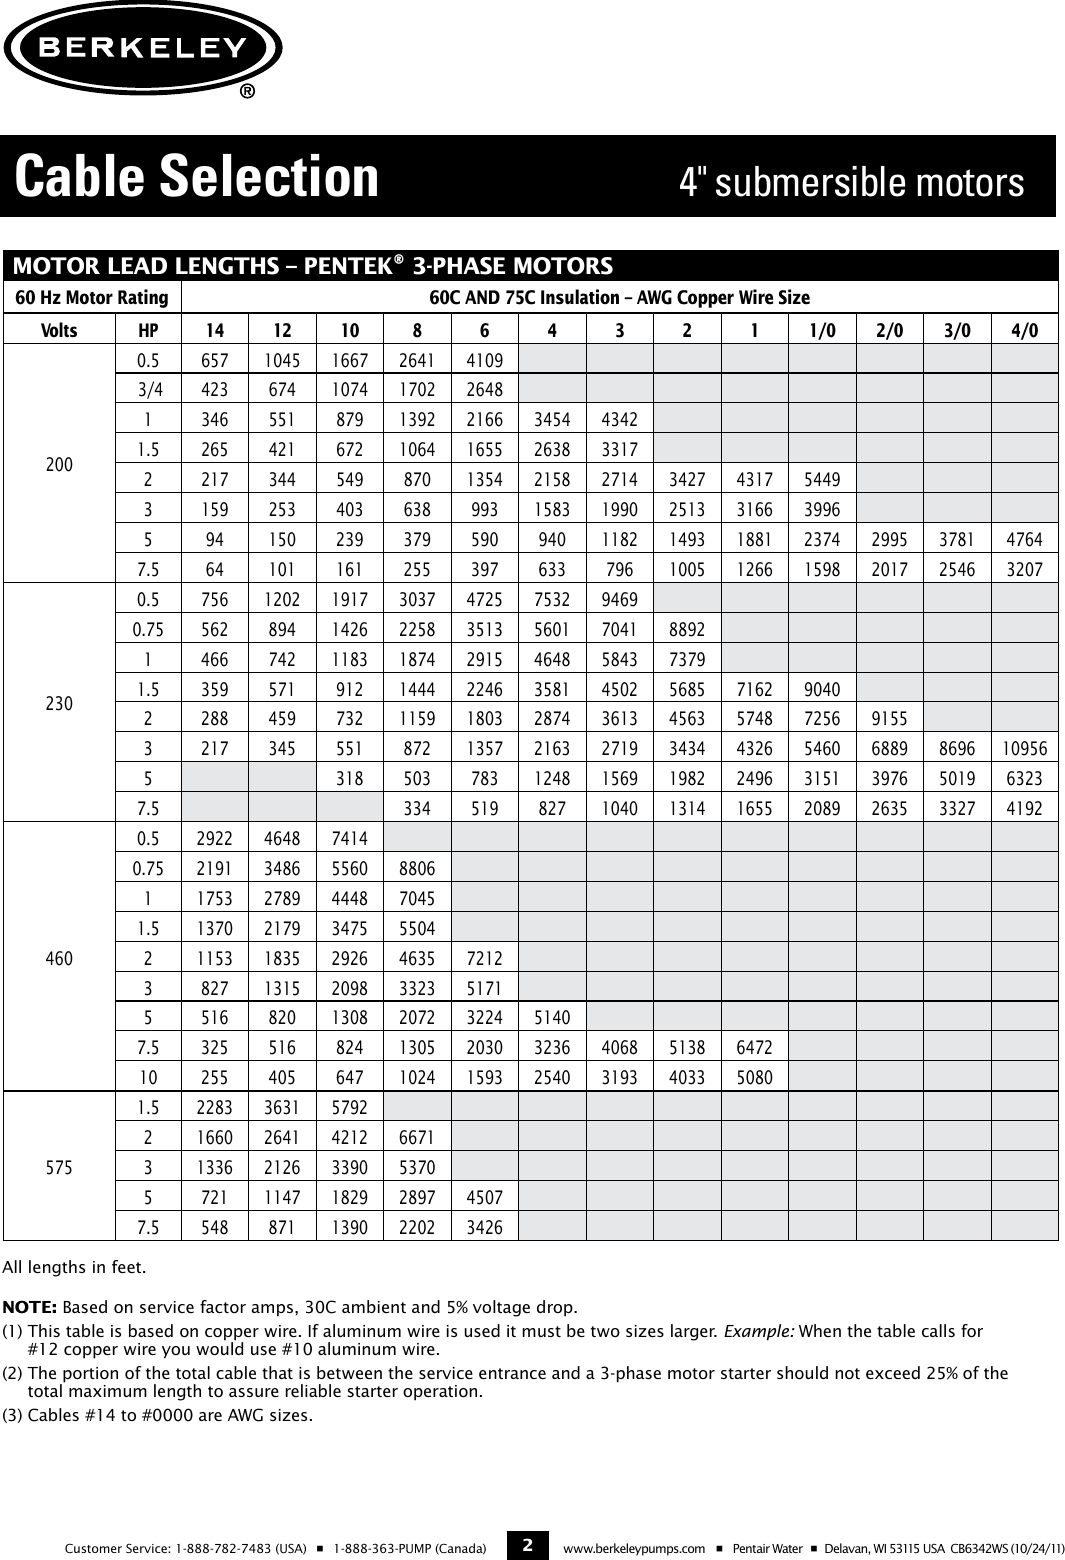 Page 2 of 2 - 71738 3 Berkeley B15P4MS10231 Cable Selection Guide